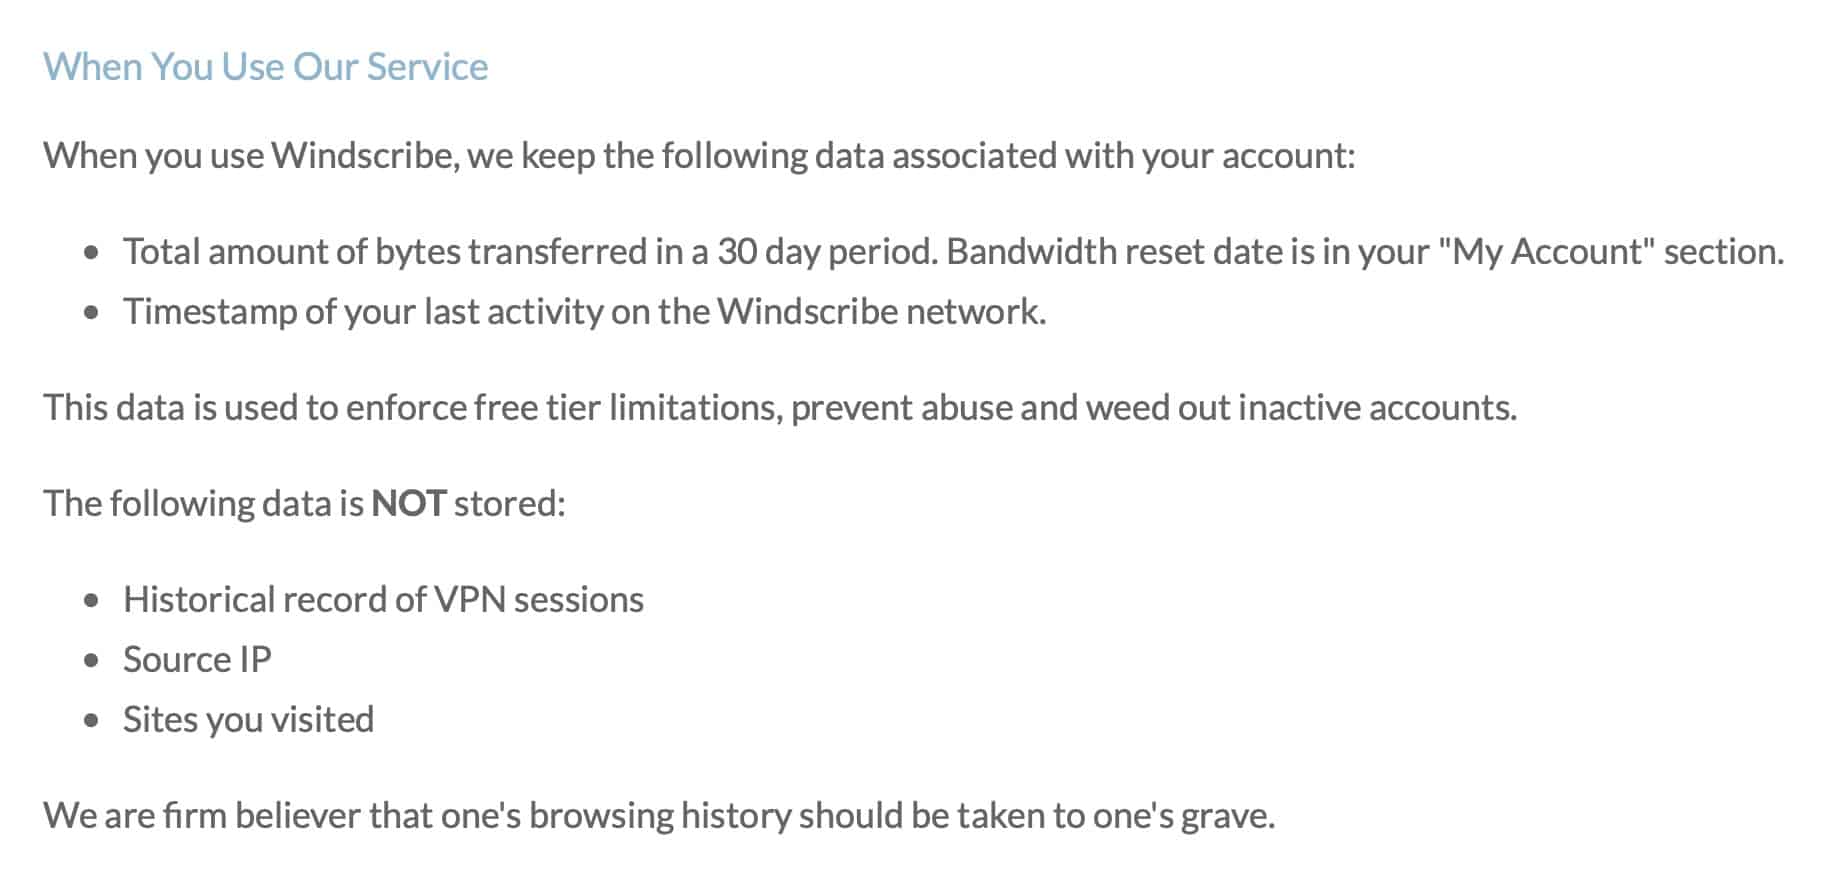 Windscribe - Privacy Policy 1